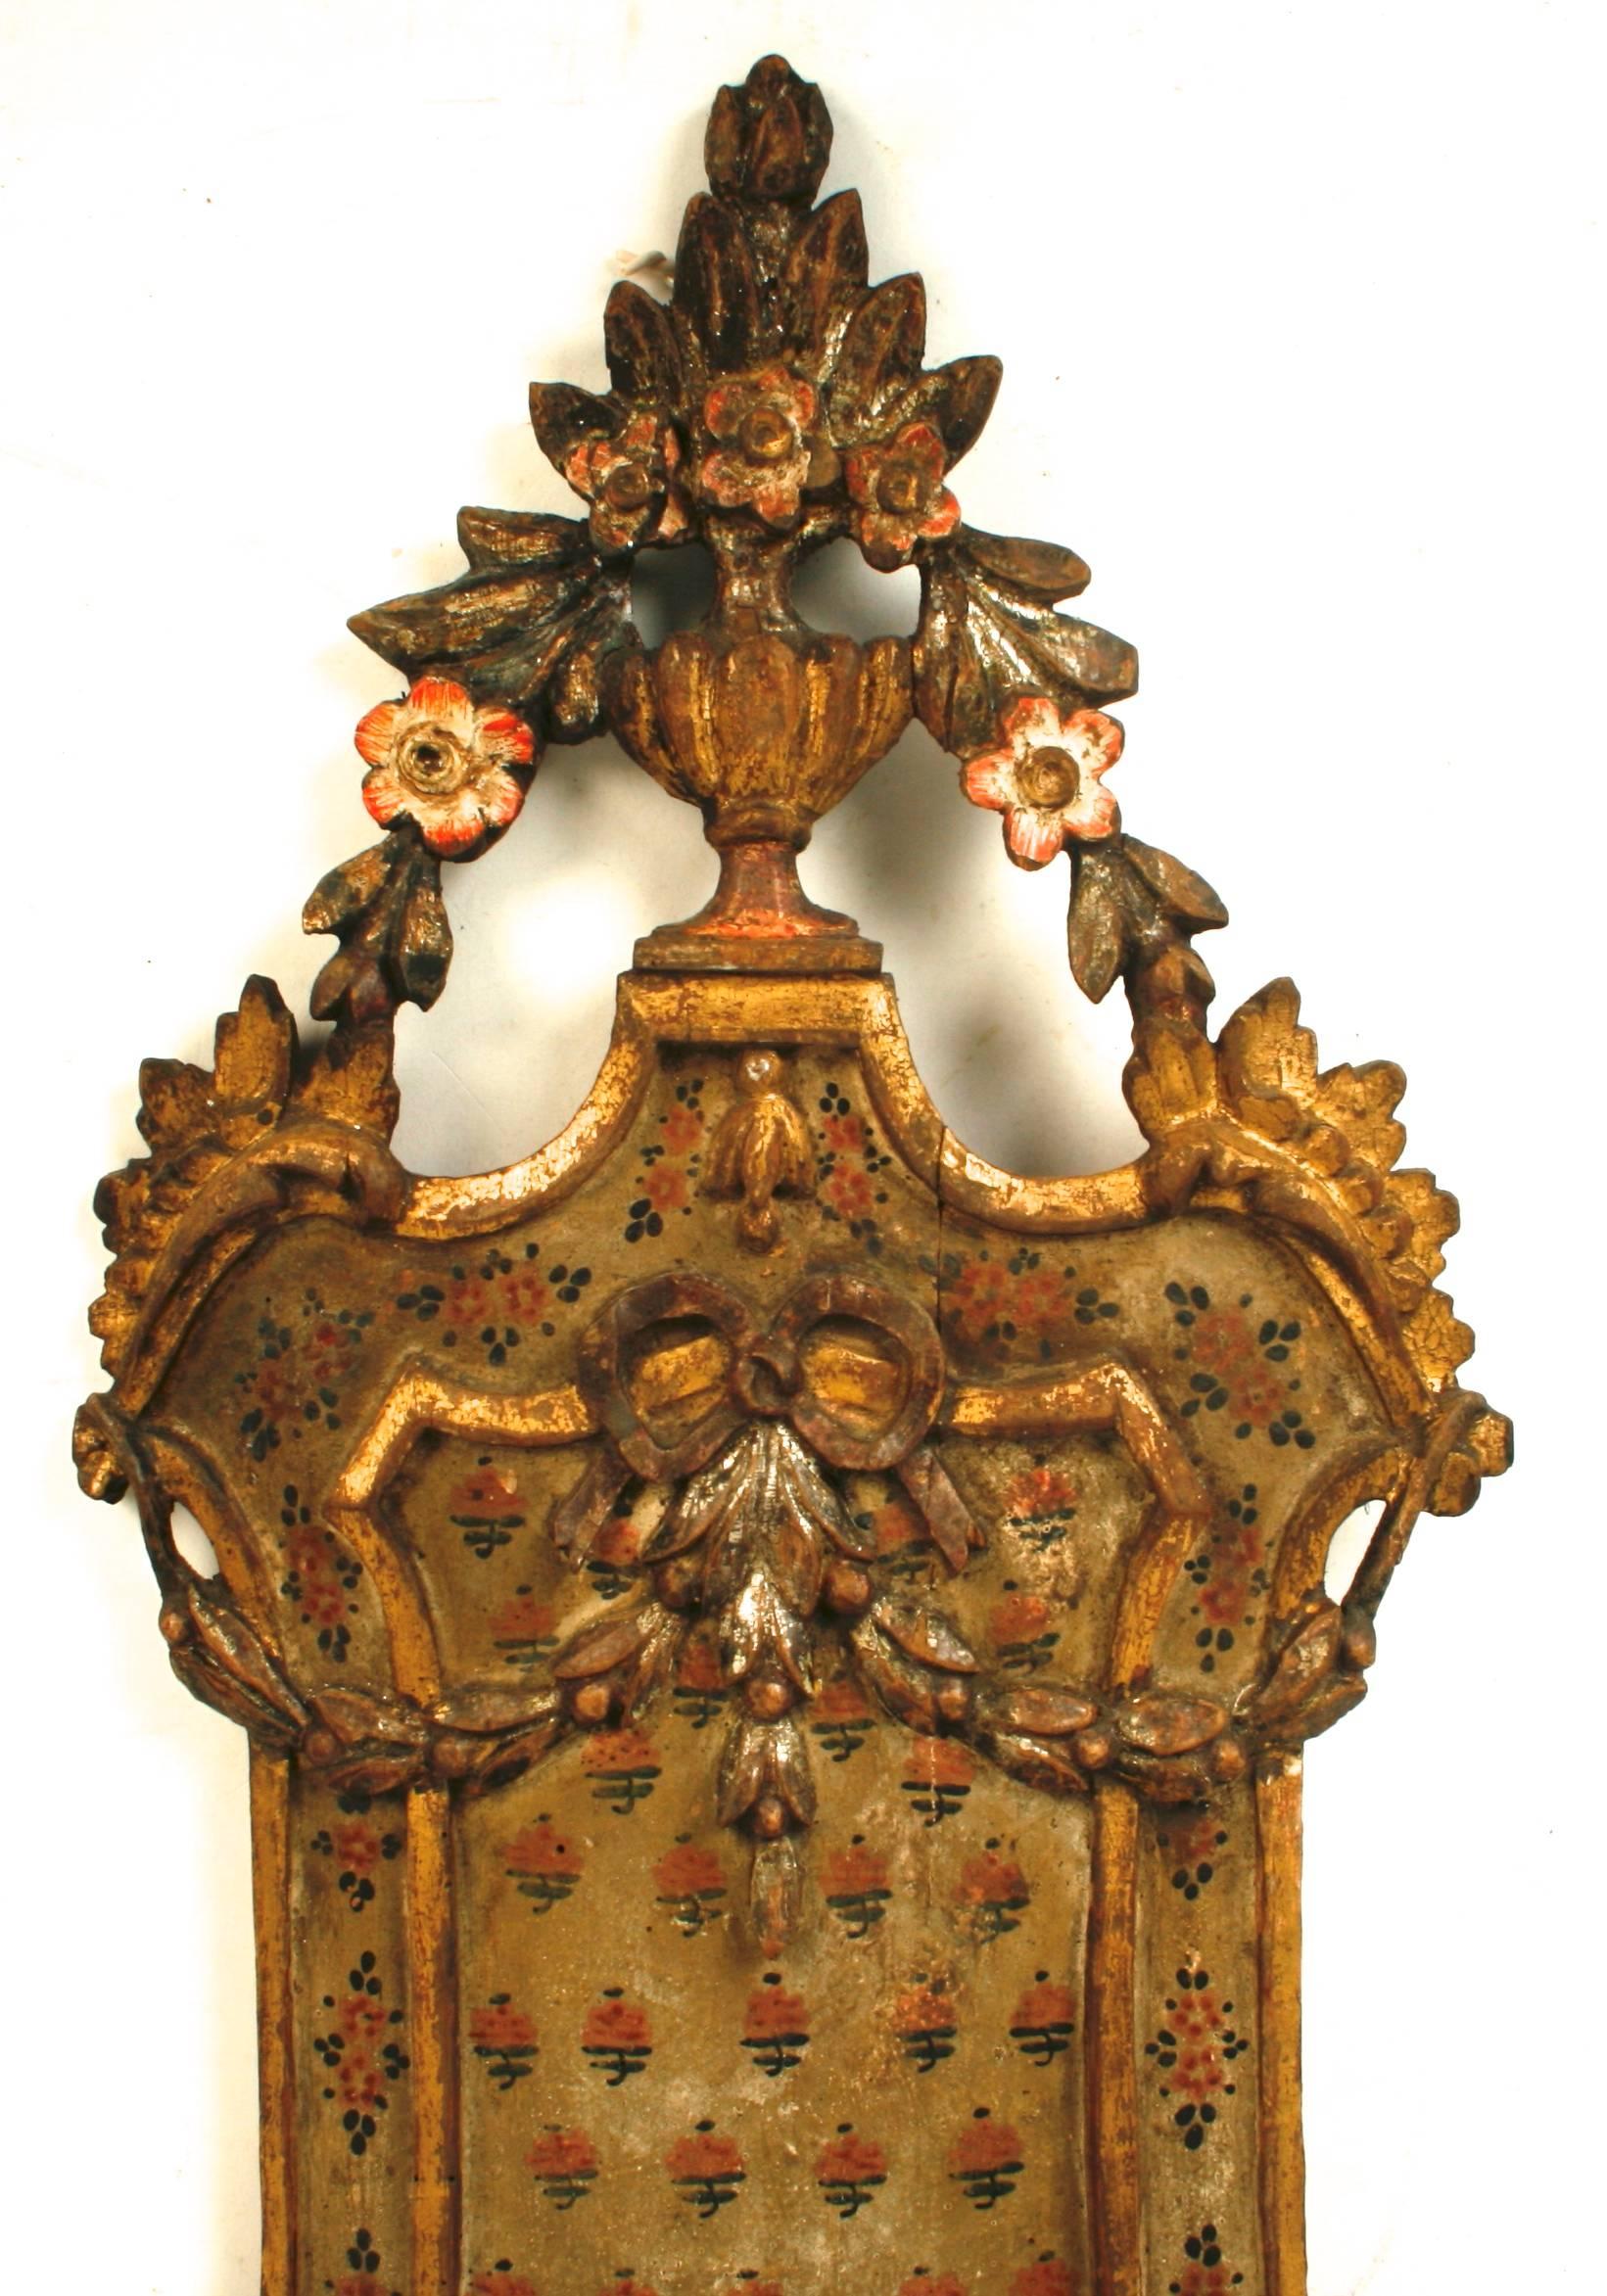 This ornate Italian carved and gilt wall shelf is decorated with hand-painted flowers and has scrolled trim, swags with a bow and is topped with a neoclassical urn. The shelf is trimmed with a scalloped apron and is supported by a scrolled bracket.